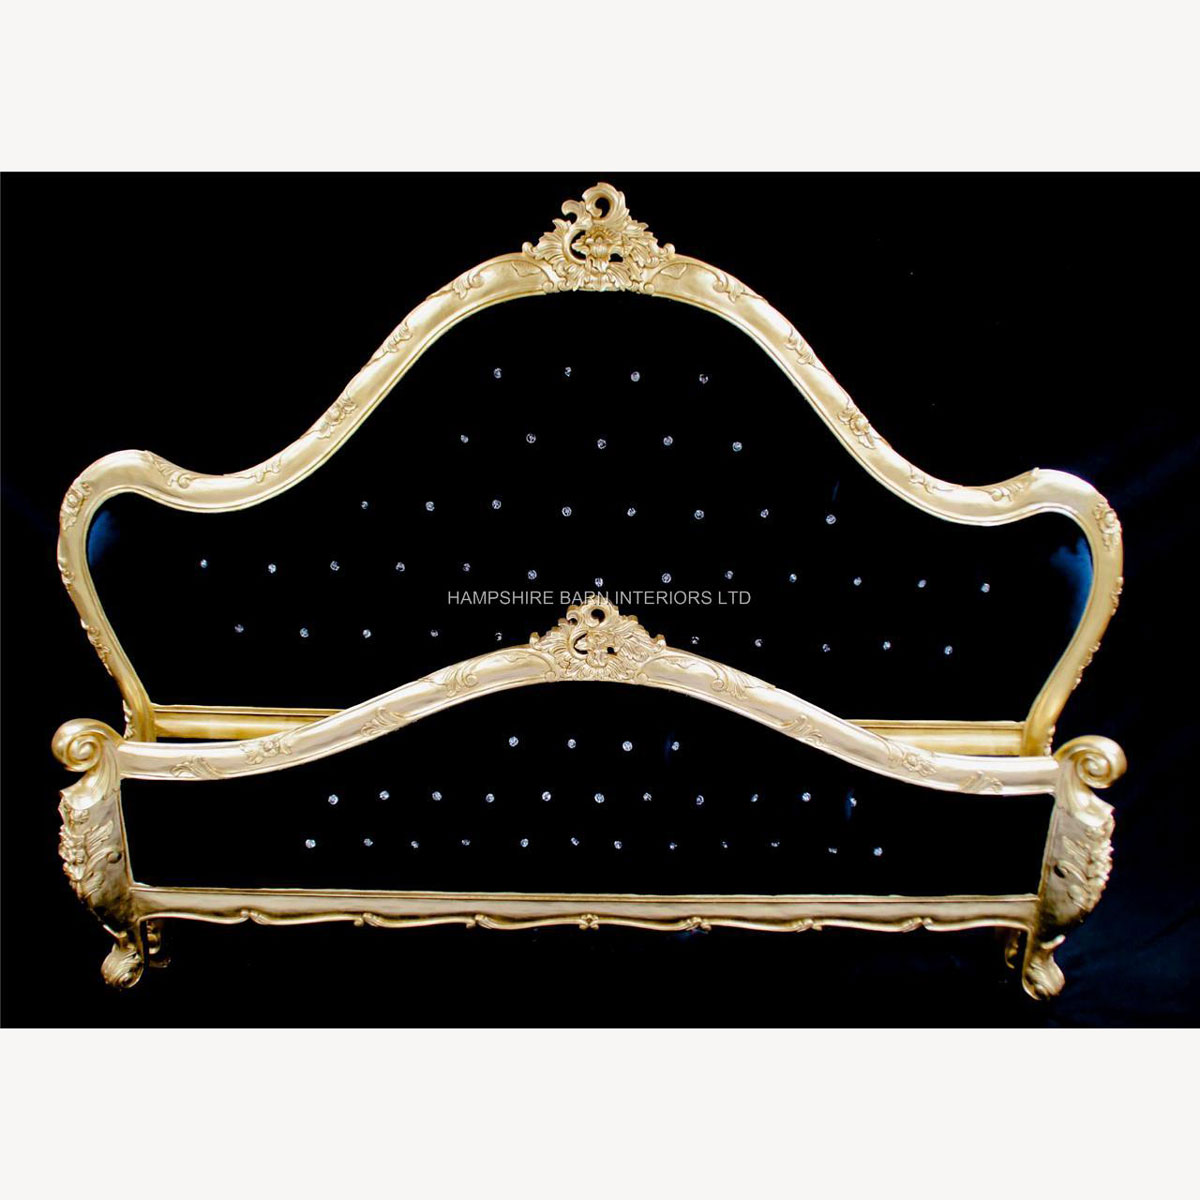 A Charles French Louis Style Bed In Gold Leaf and upholstered in a black velvet fabric with crystals 1 - Hampshire Barn Interiors - A Charles French Louis Style Bed In Gold Leaf and upholstered in a black velvet fabric with crystals -